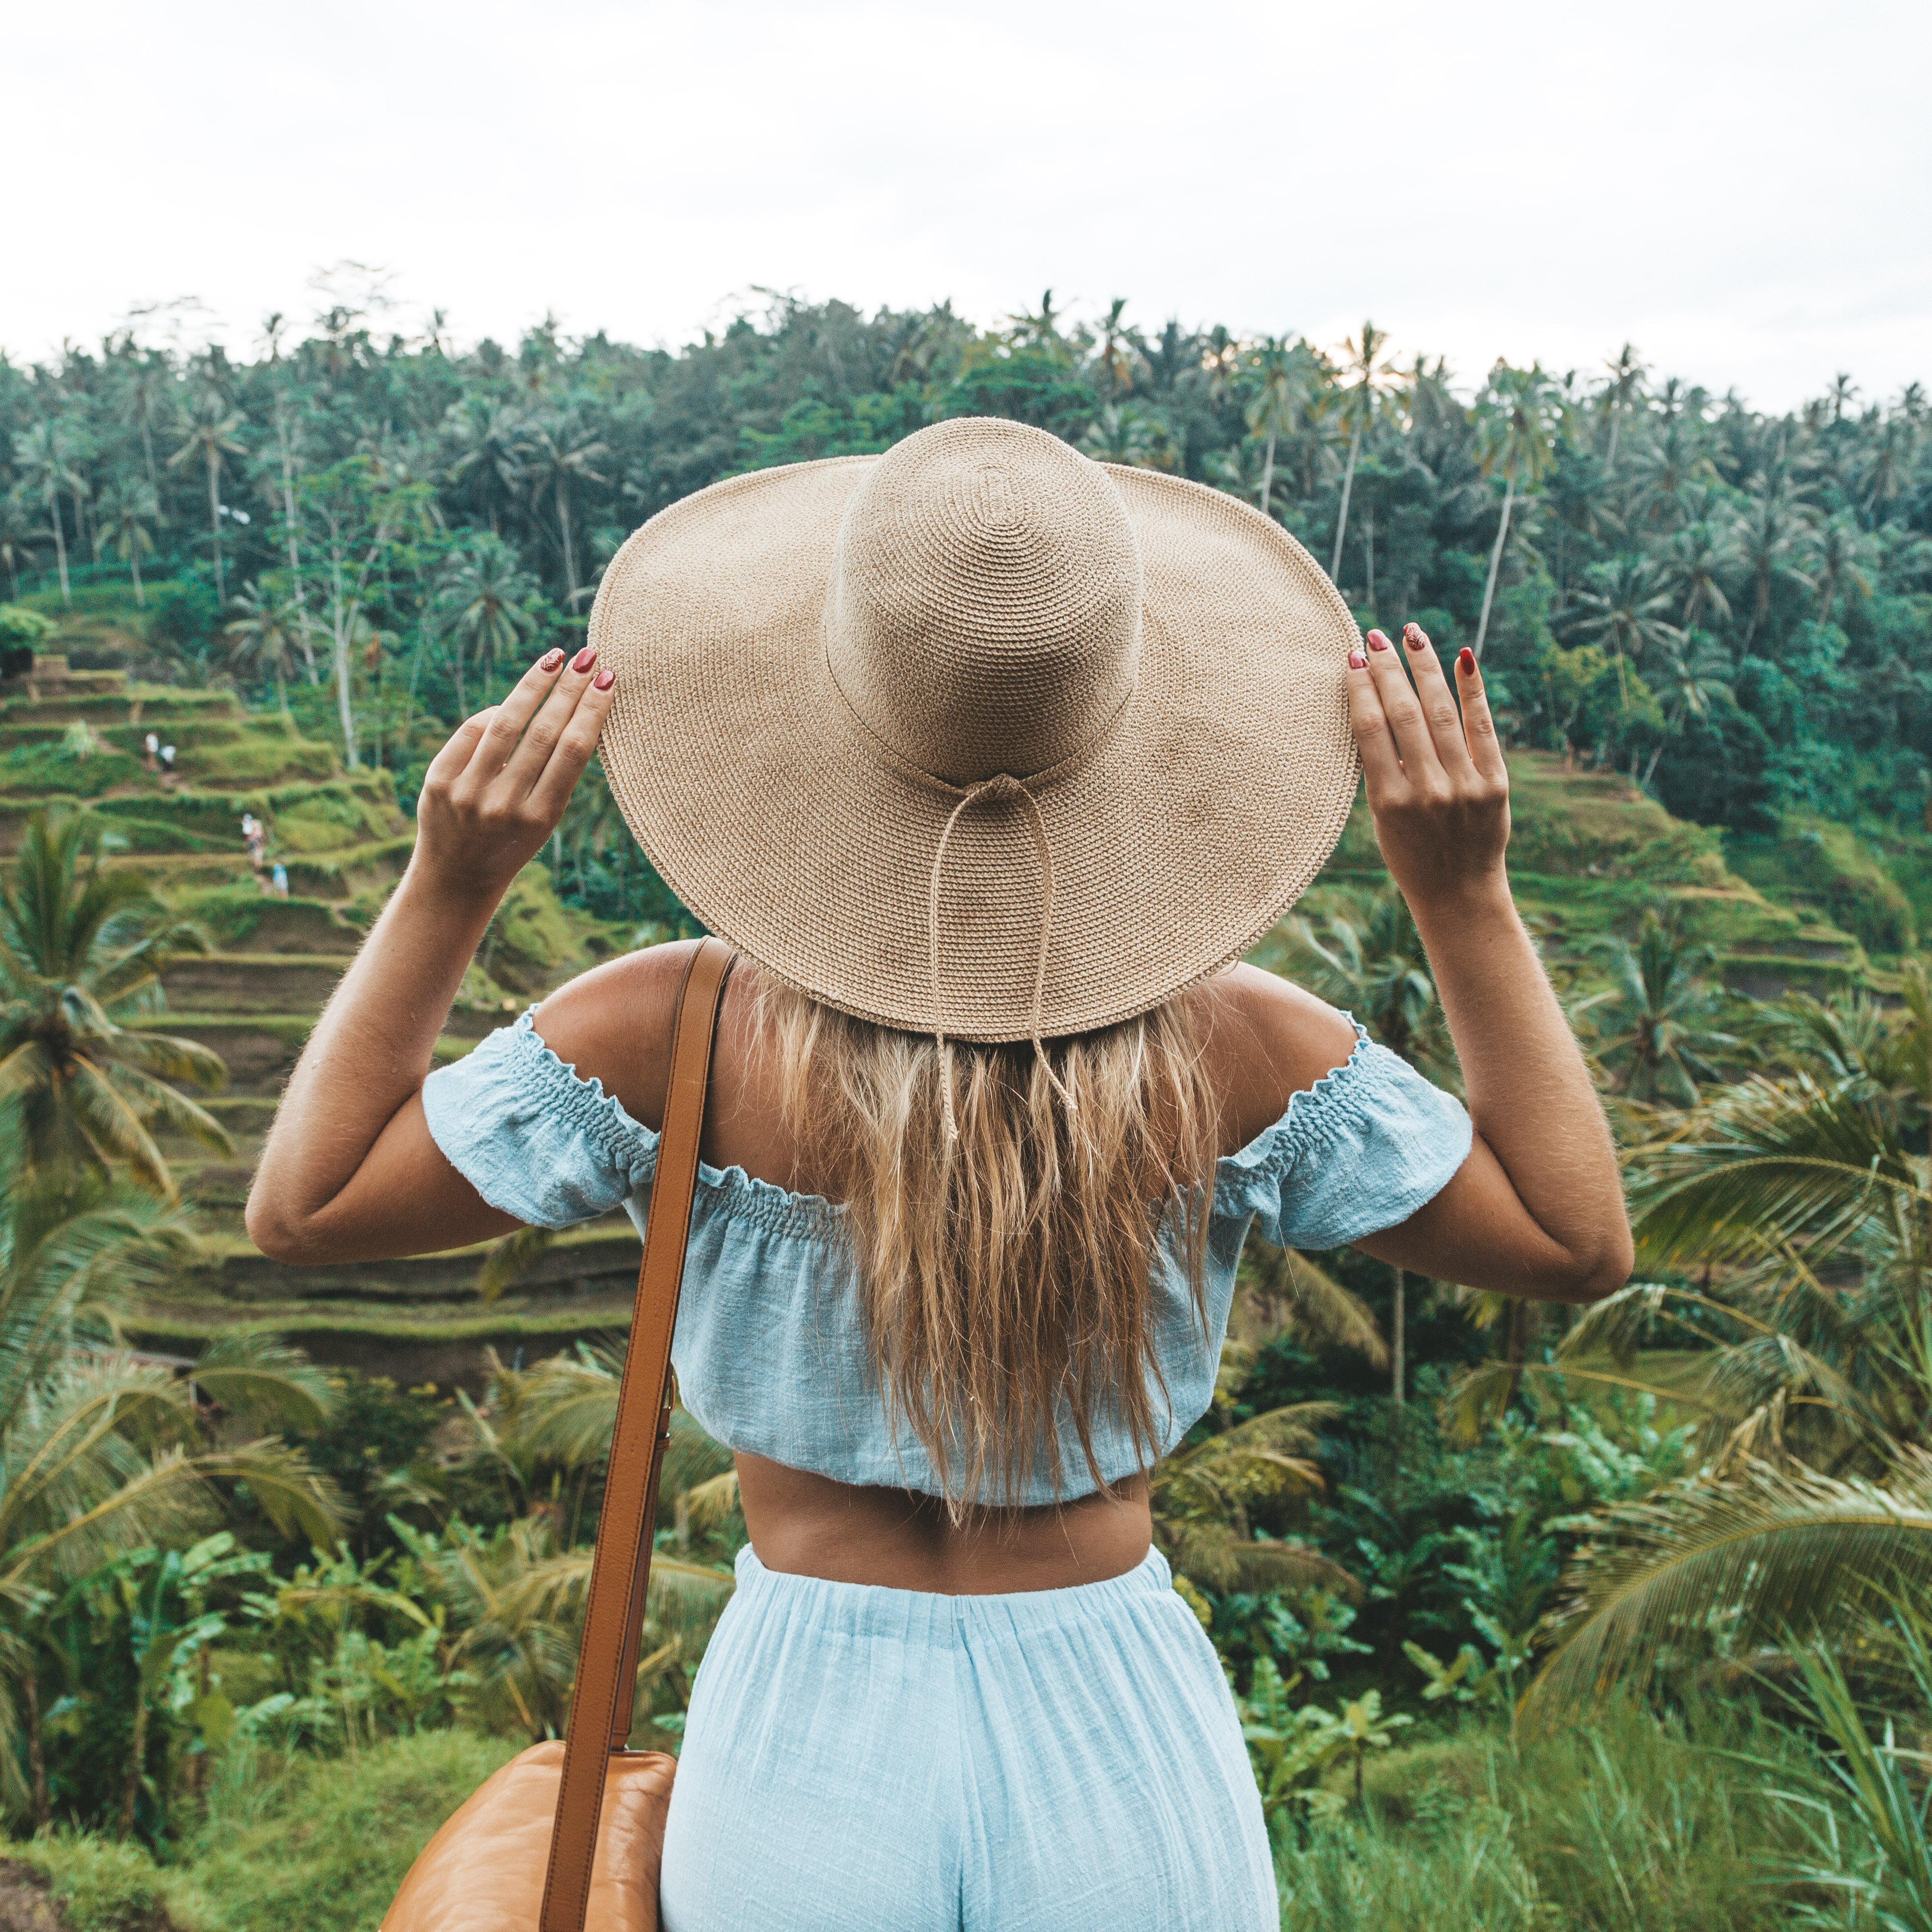 Blogging Retreat in Bali with The Blonde Abroad